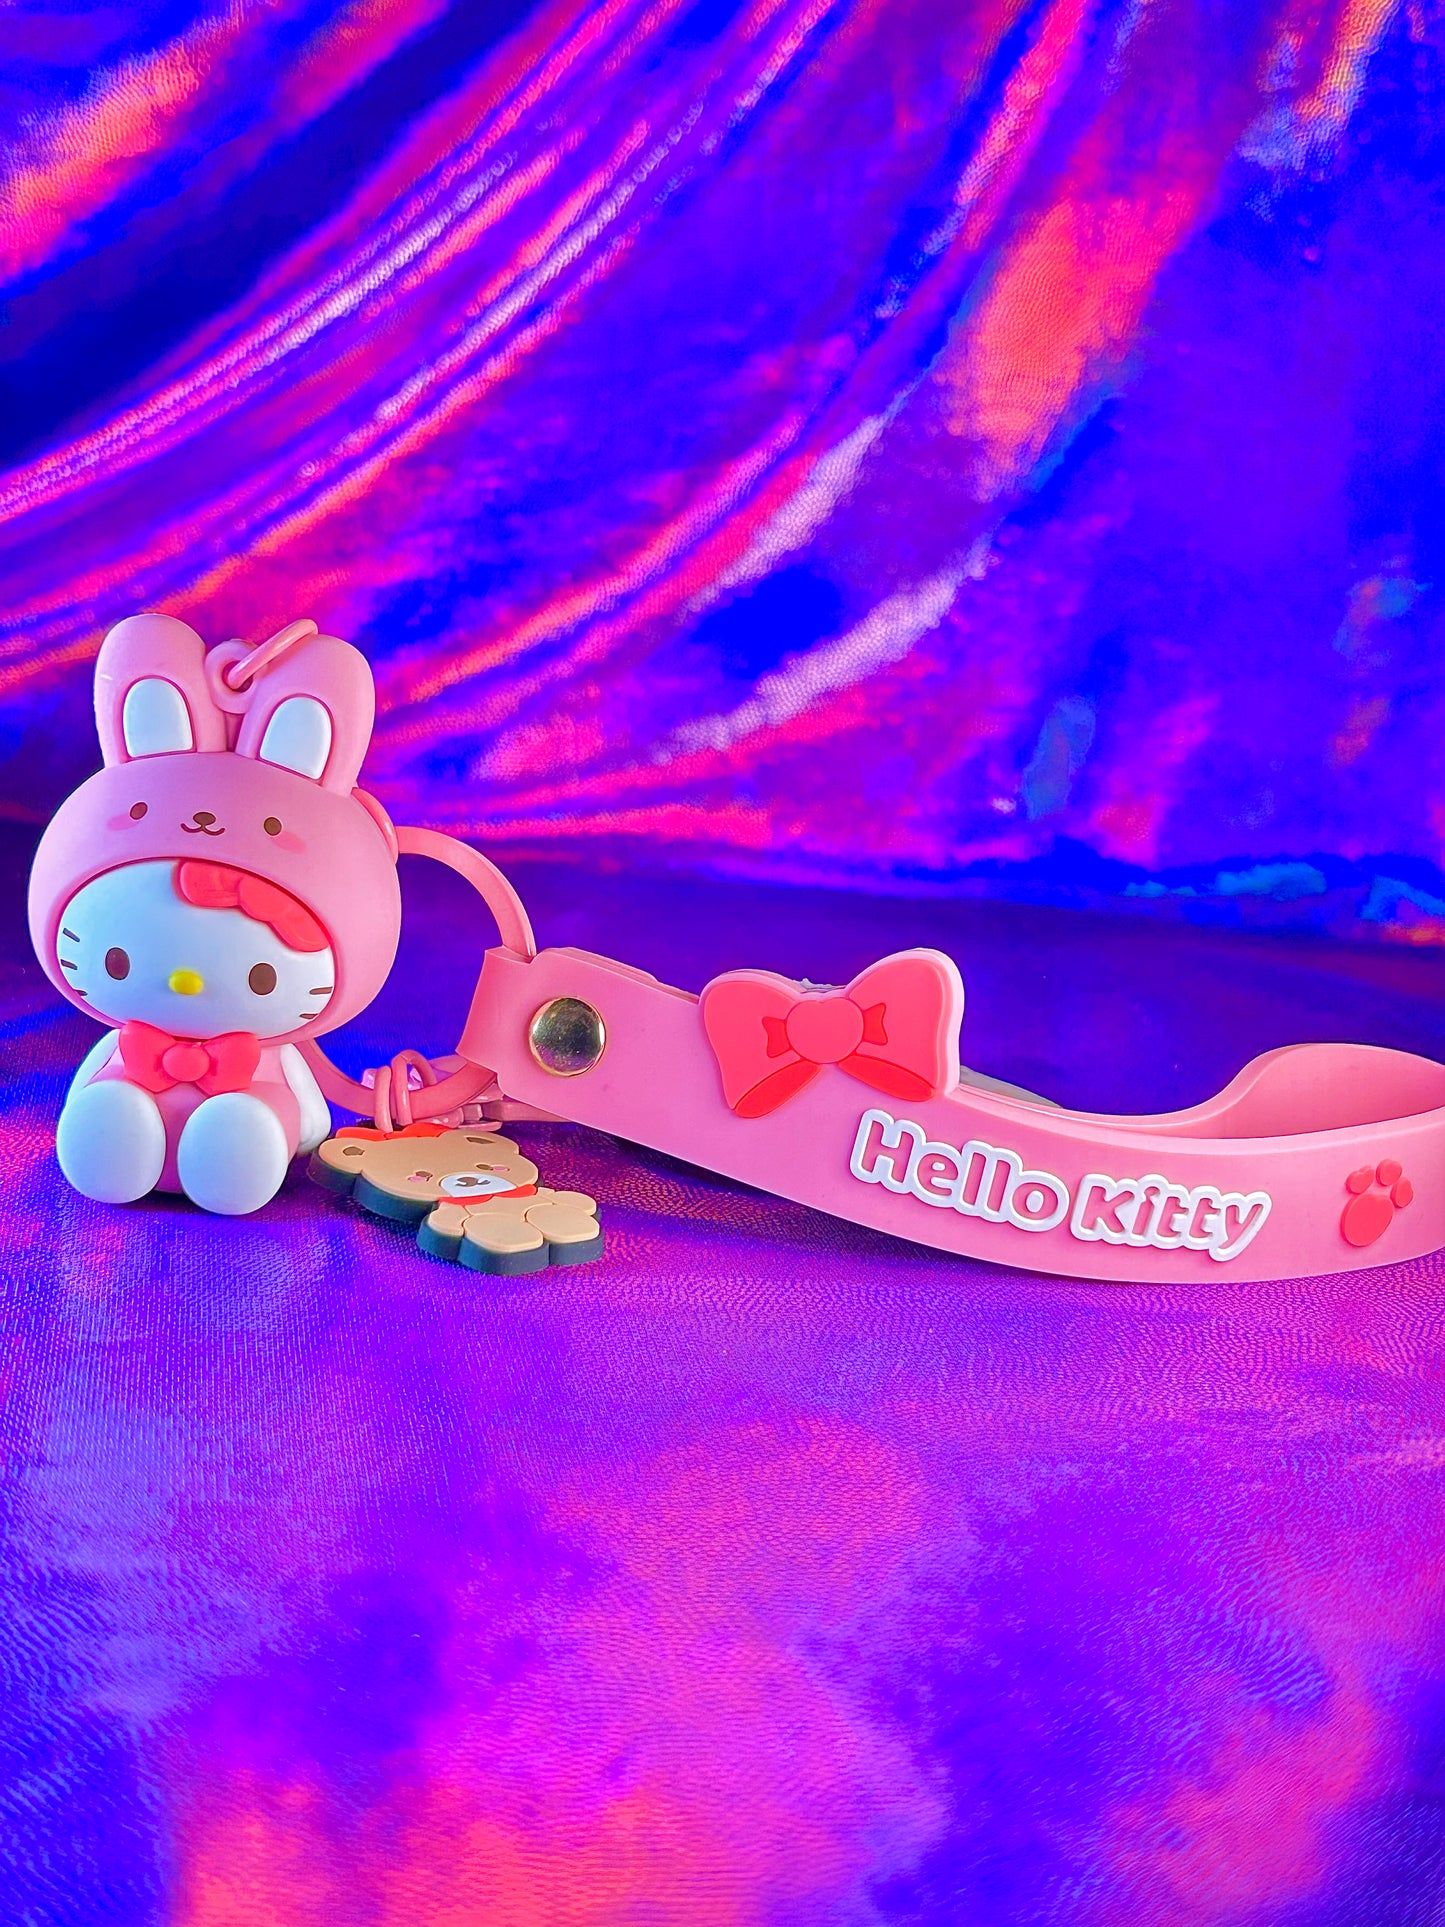 A hello kitty toy and a hello kitty keychain - Sanrio